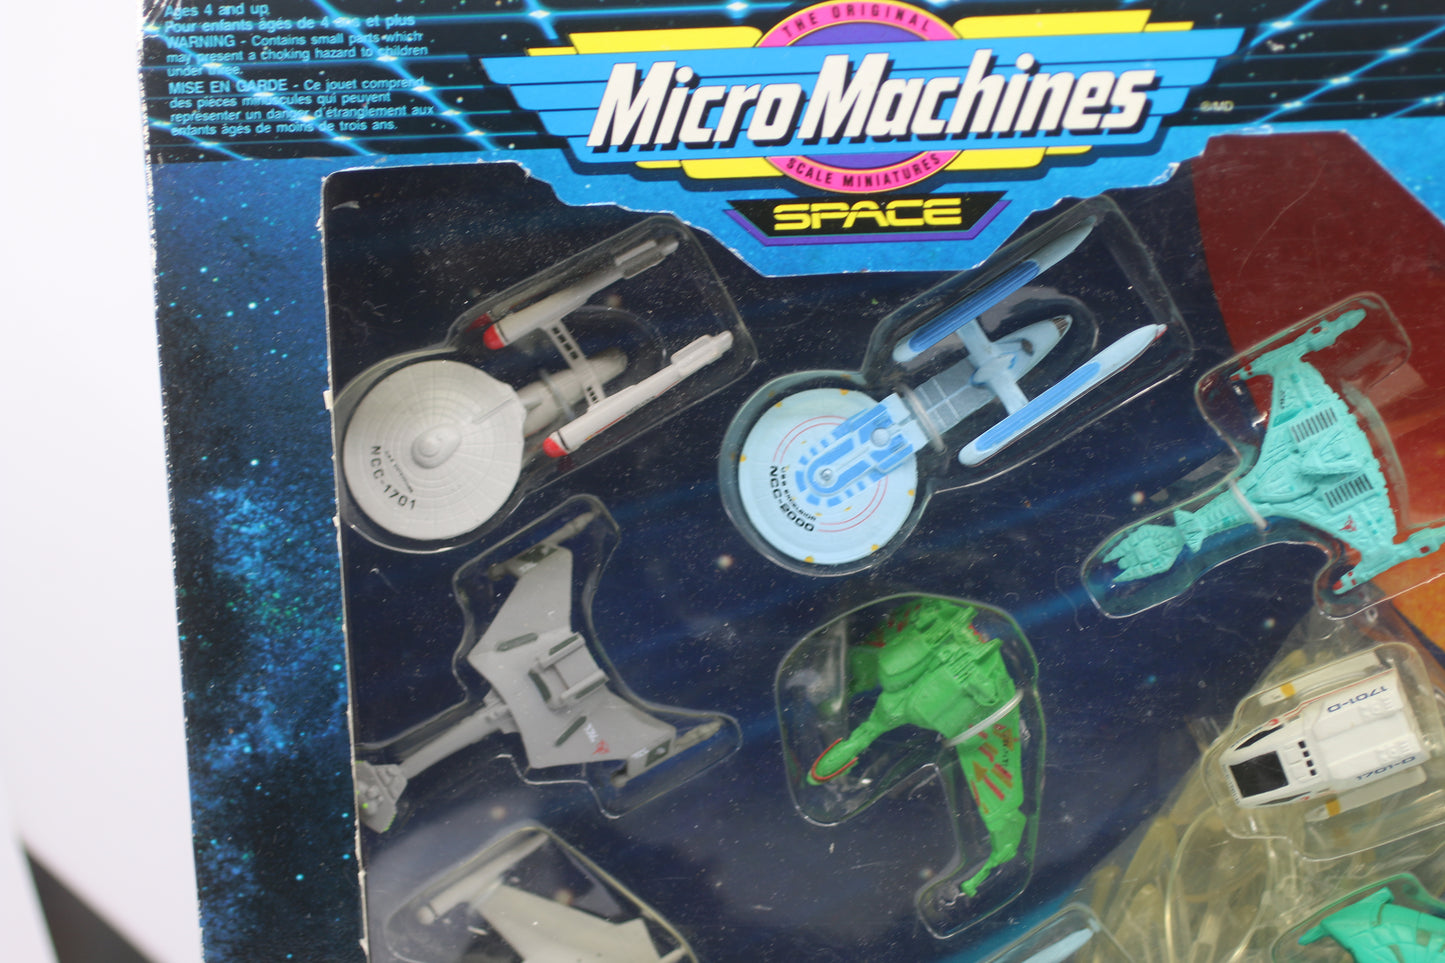 Galoob Micro Machines Space Star Trek Limited Edition Collector's Set MISB 1993